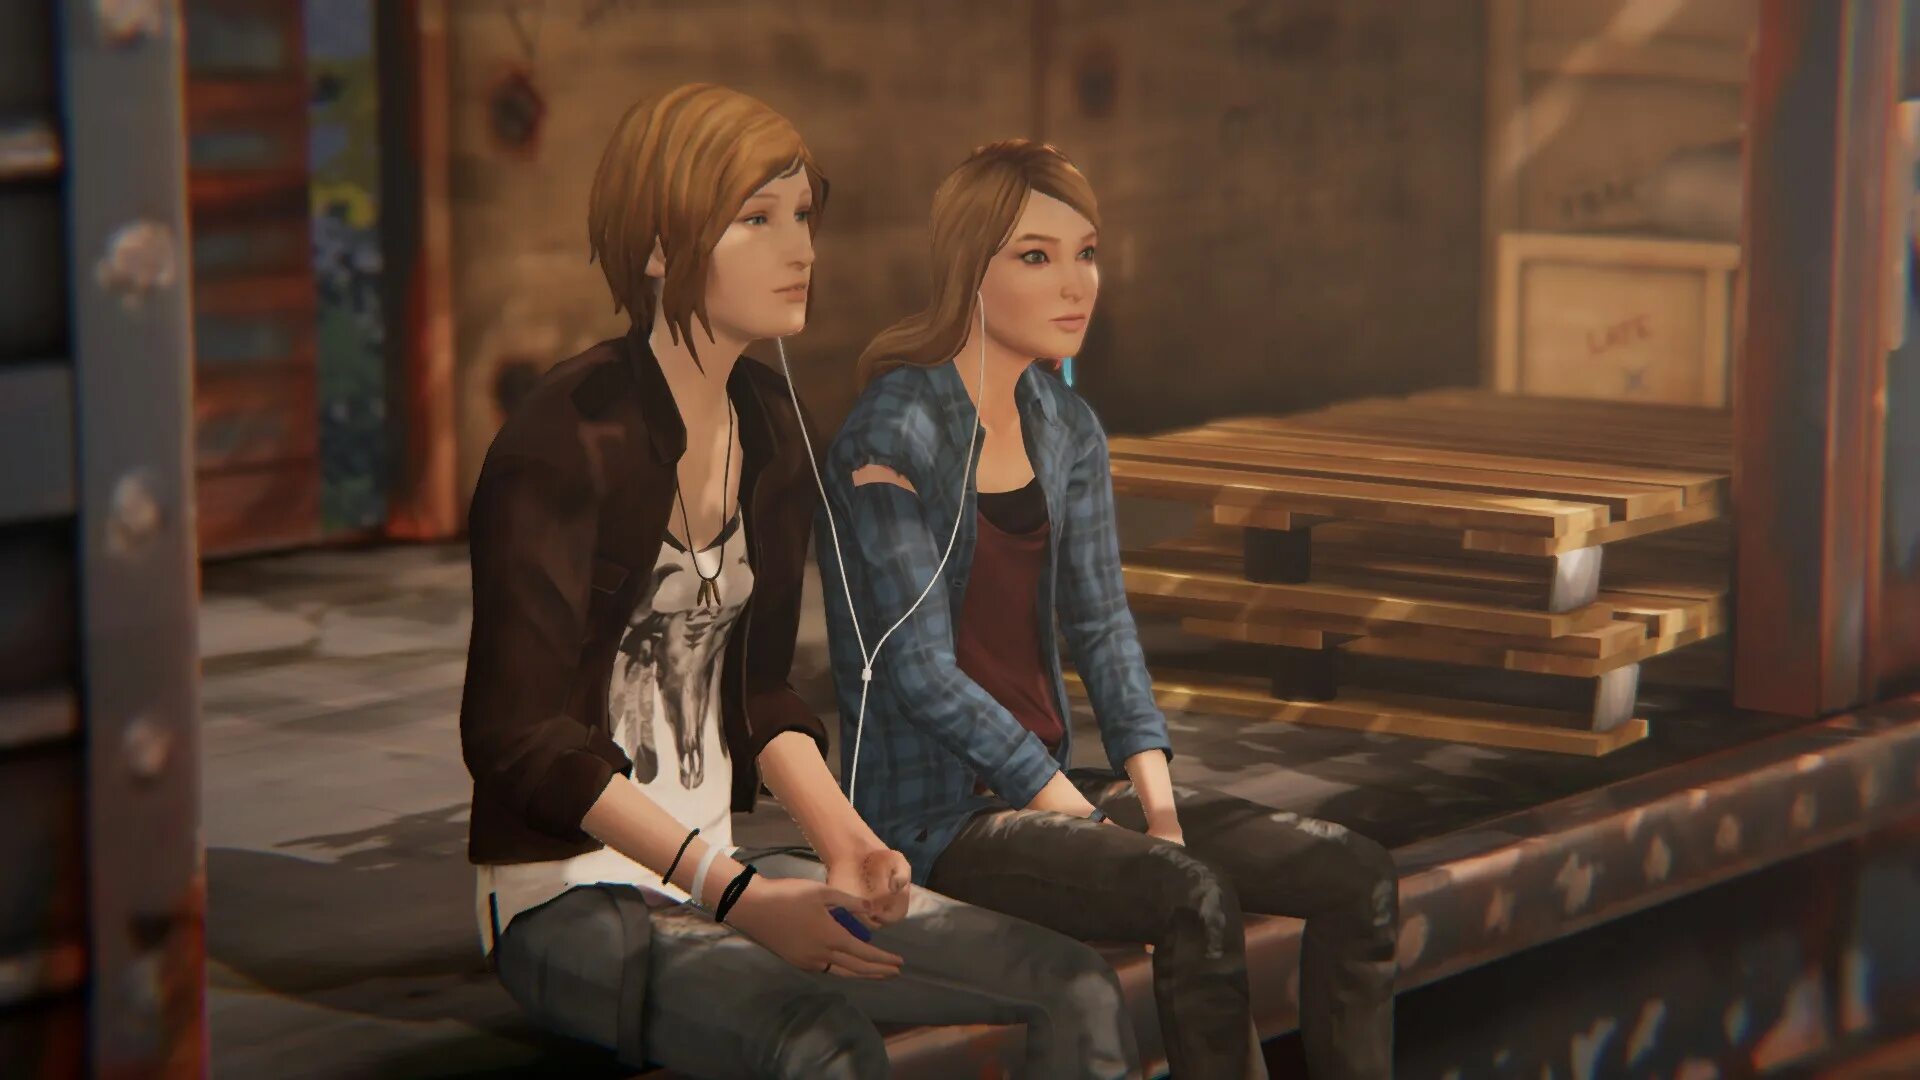 N life being. Life is Strange: before the Storm. Life is Strange before the Storm Chloe. Life is Strange: before the Storm - Farewell.